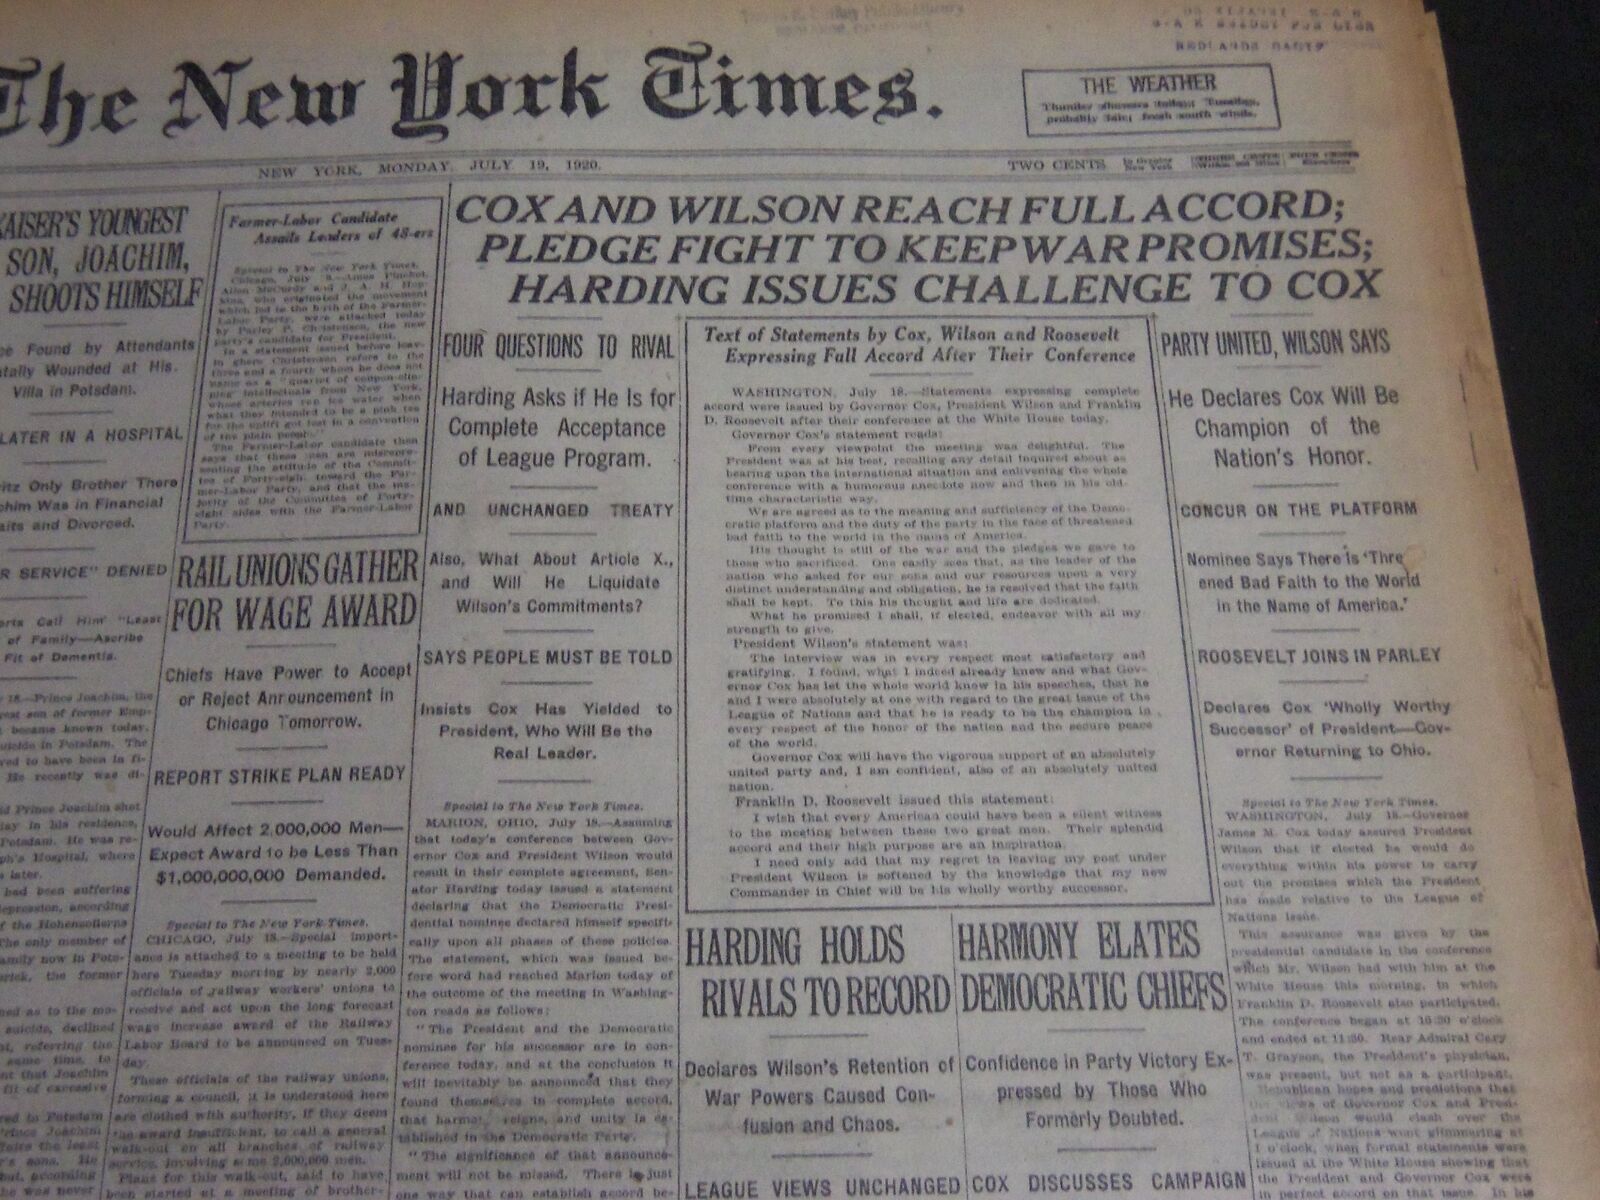 1920 JULY 9 NEW YORK TIMES - COX AND WILSON REACH FULL ACCORD - NT 6752